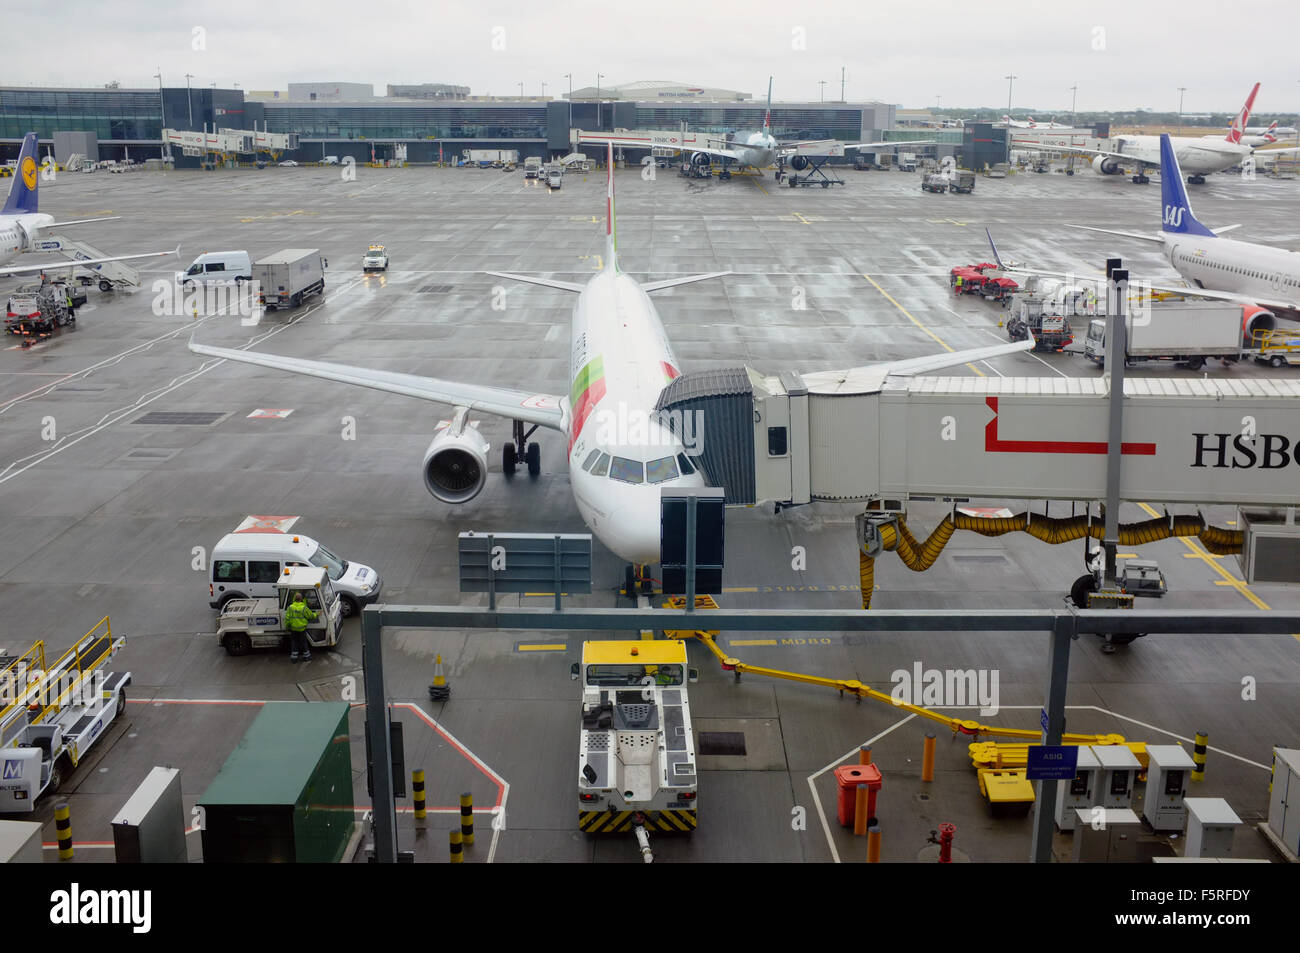 A small plane is loaded at Heathrow Airport in the UK. Stock Photo